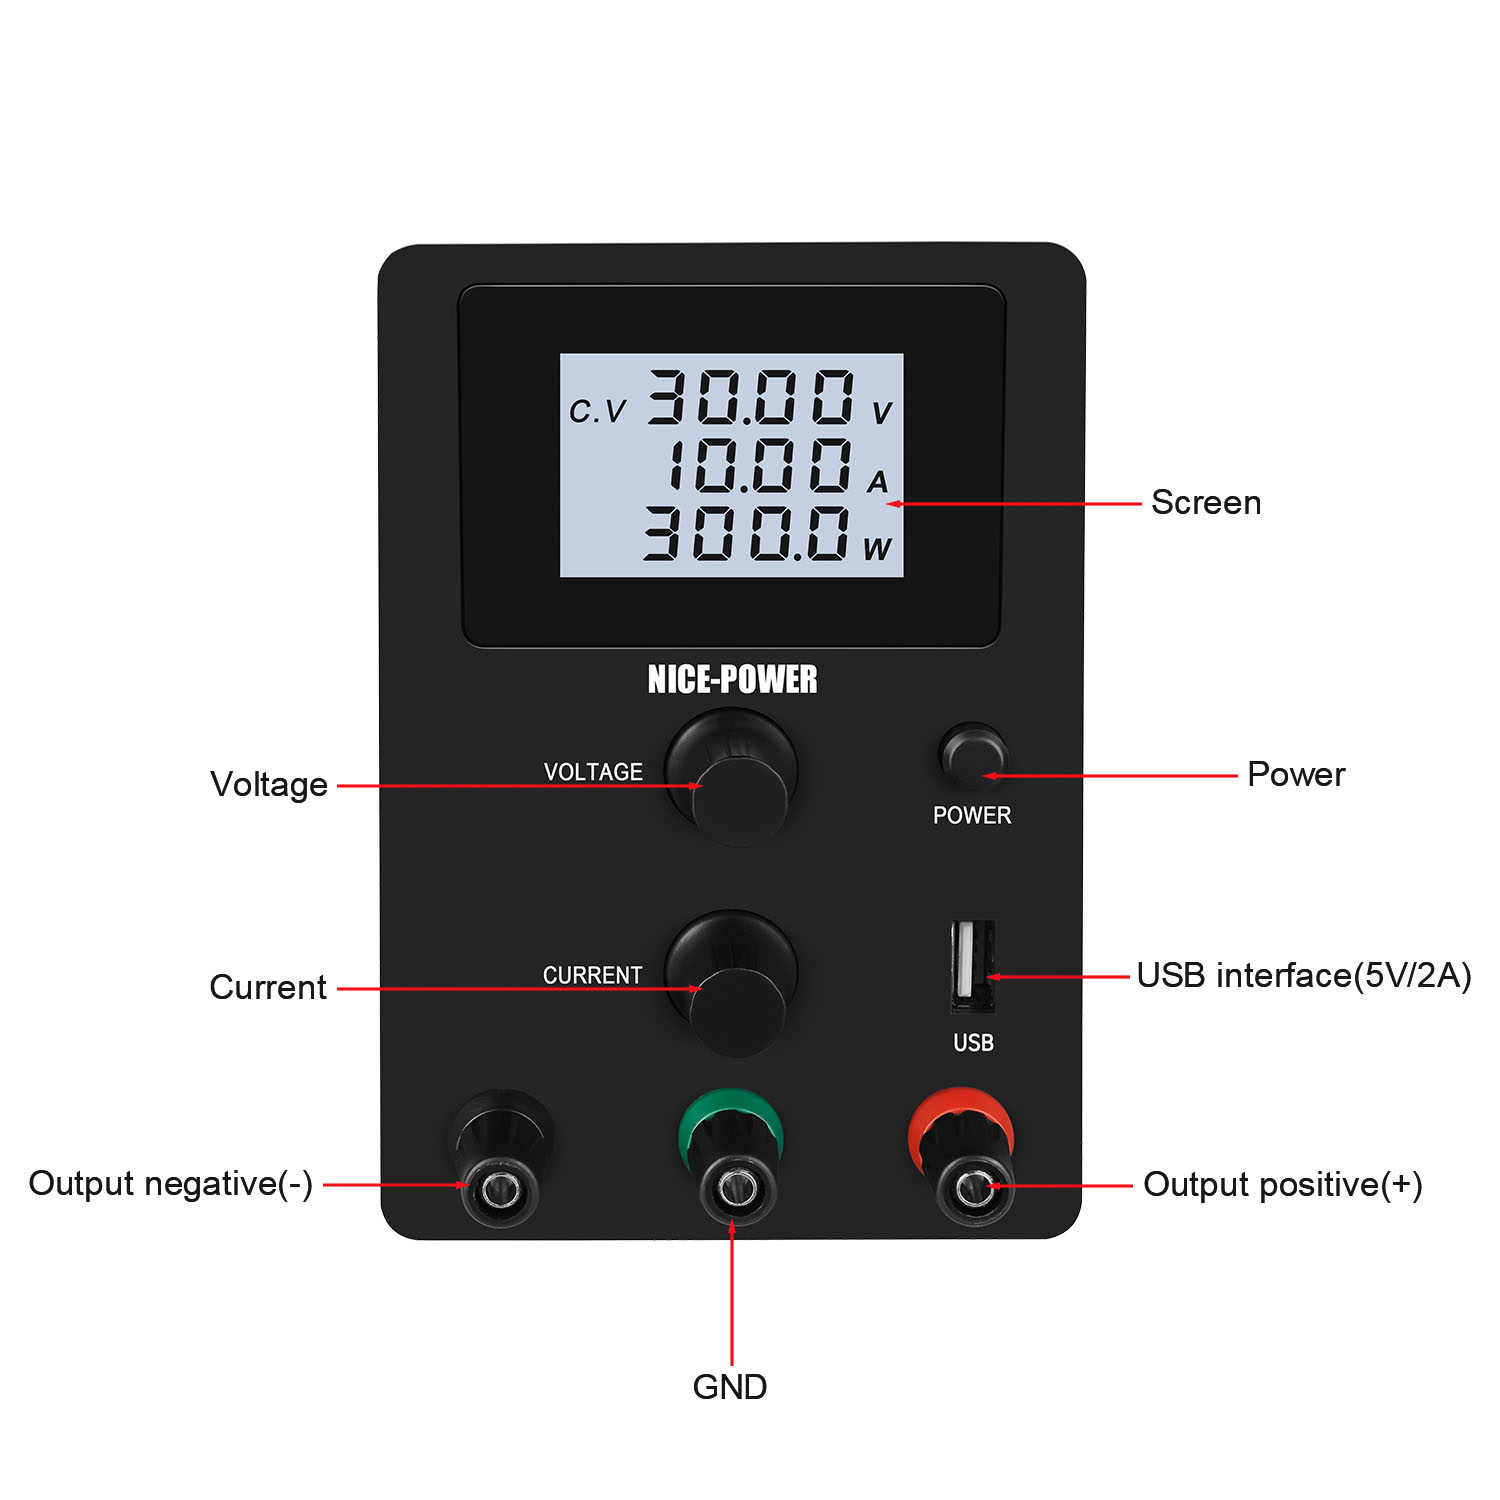 220V 0-30V 0-10A DC Power Supply Switching Voltage-stabilized Source Regulated Power Voltage Supply C V CC Dual Output Modes